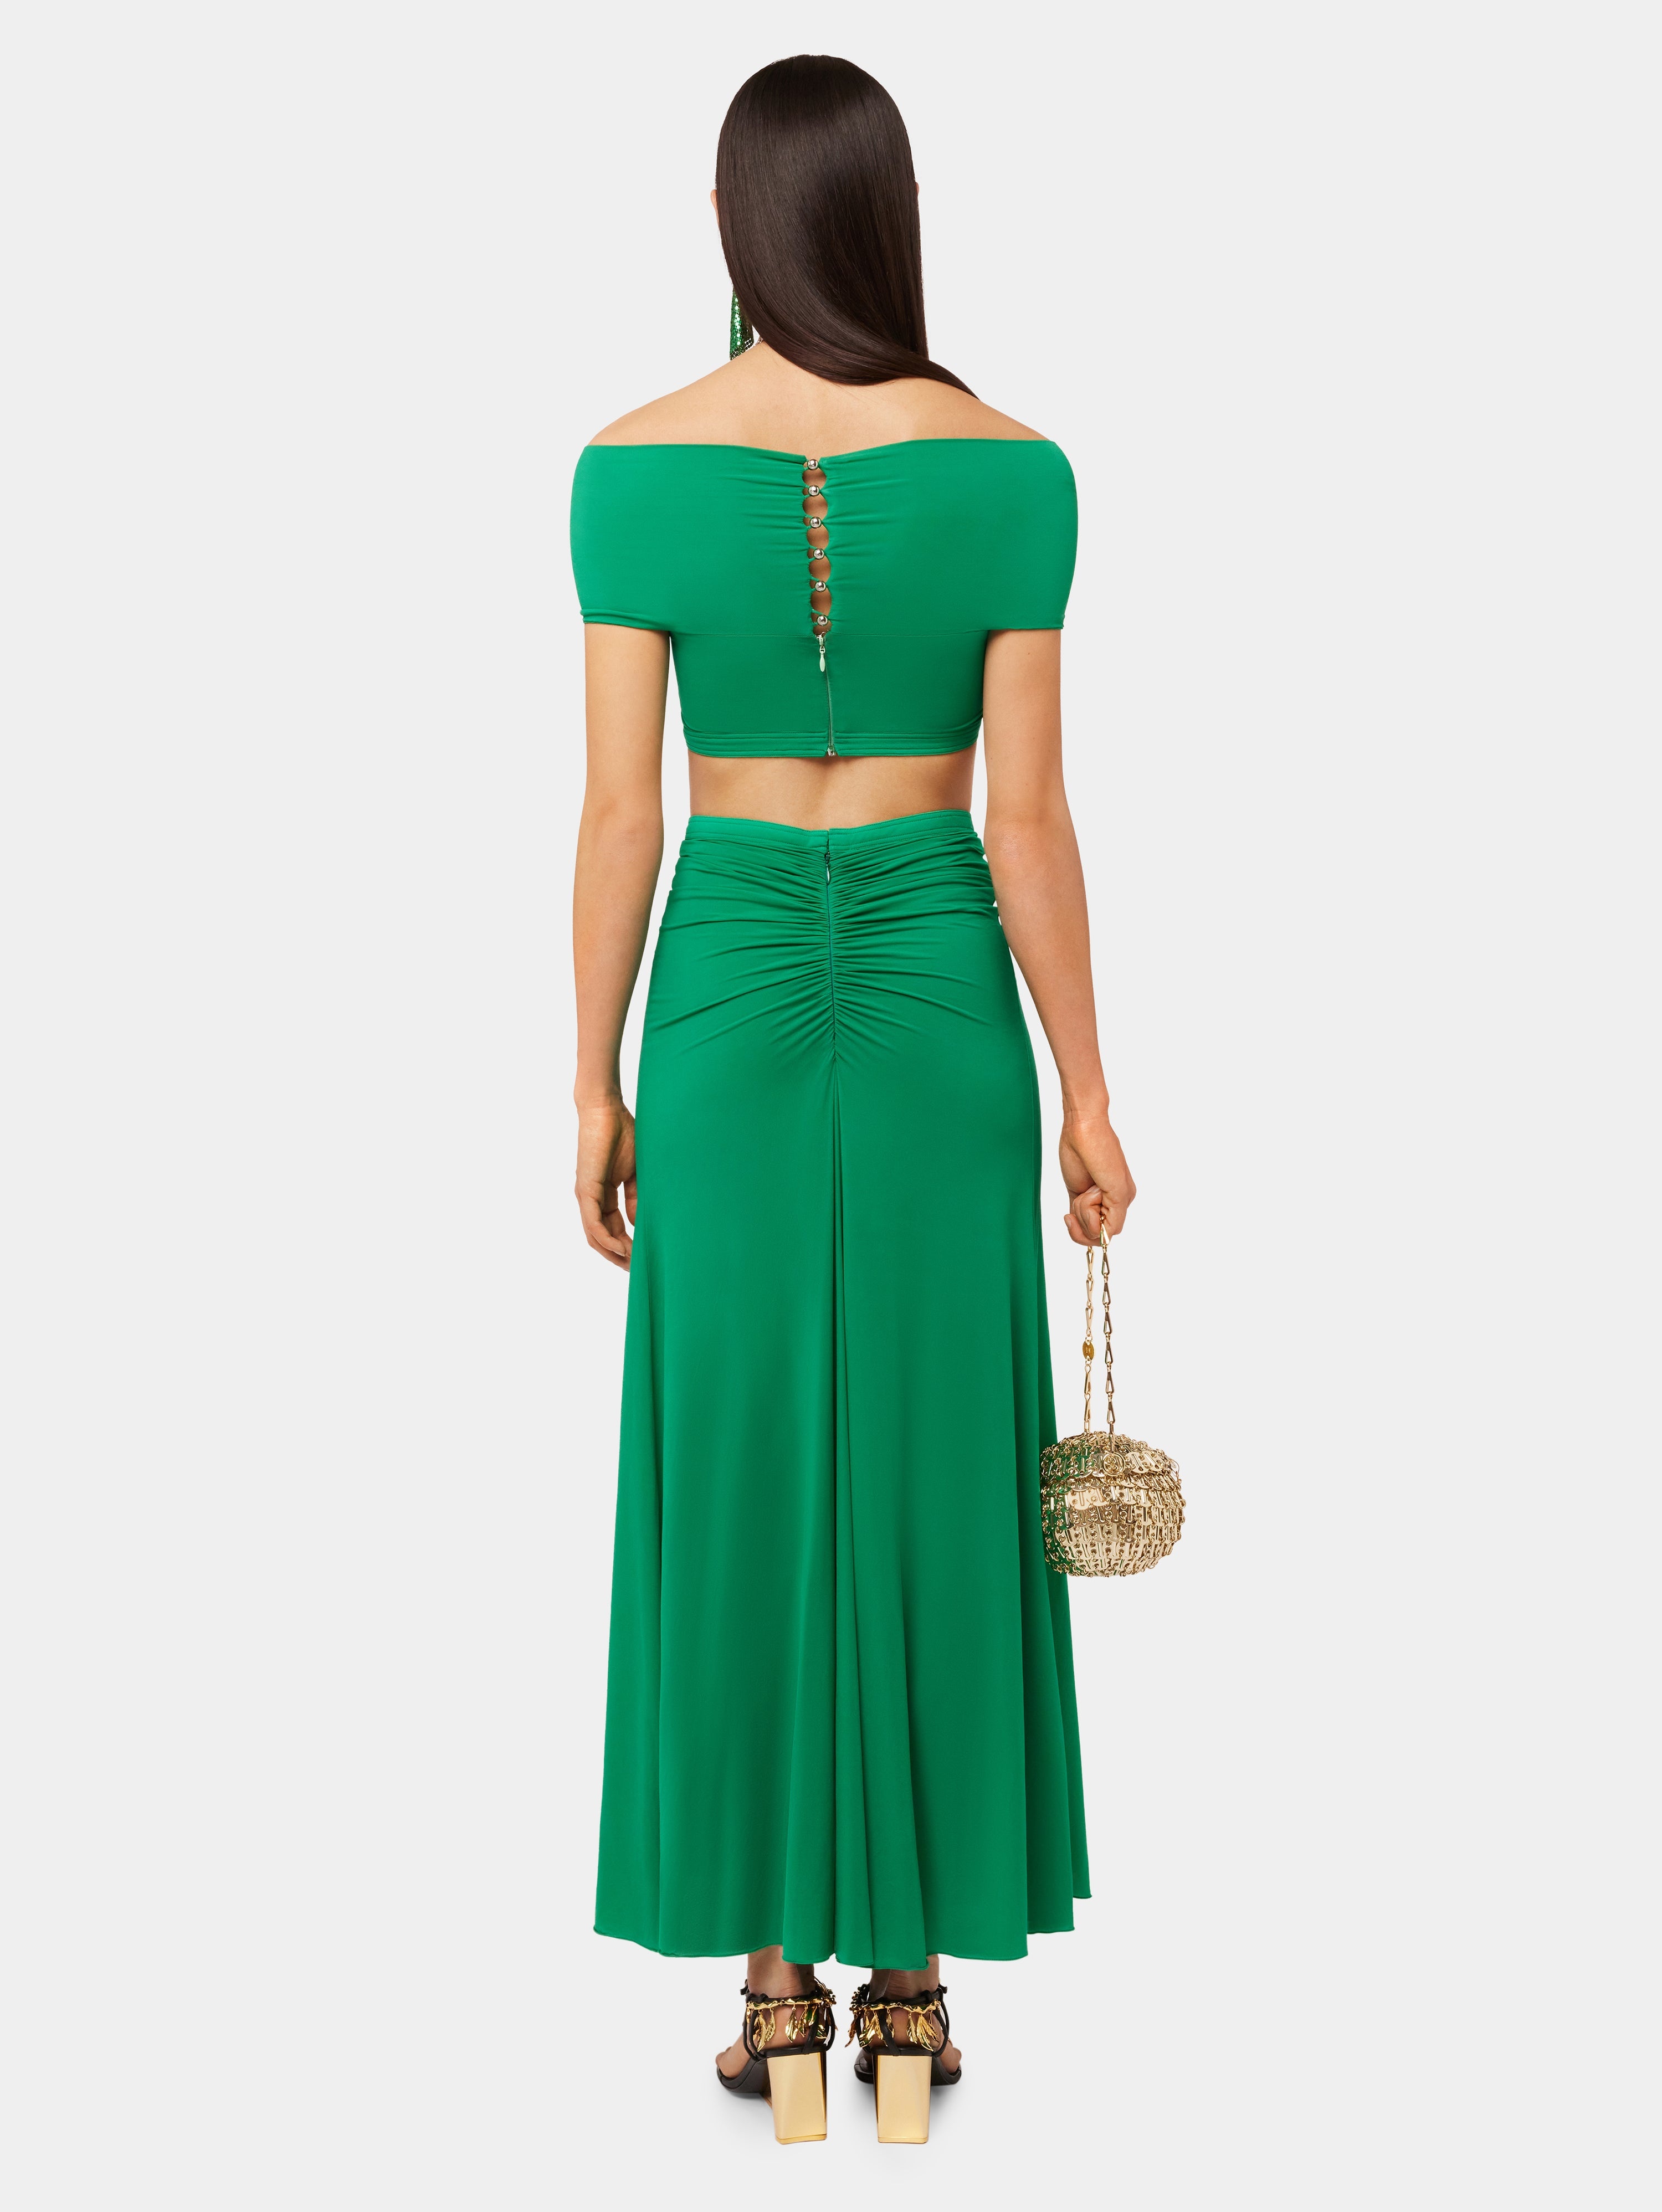 GREEN FLARED DRAPED SKIRT IN JERSEY - 5